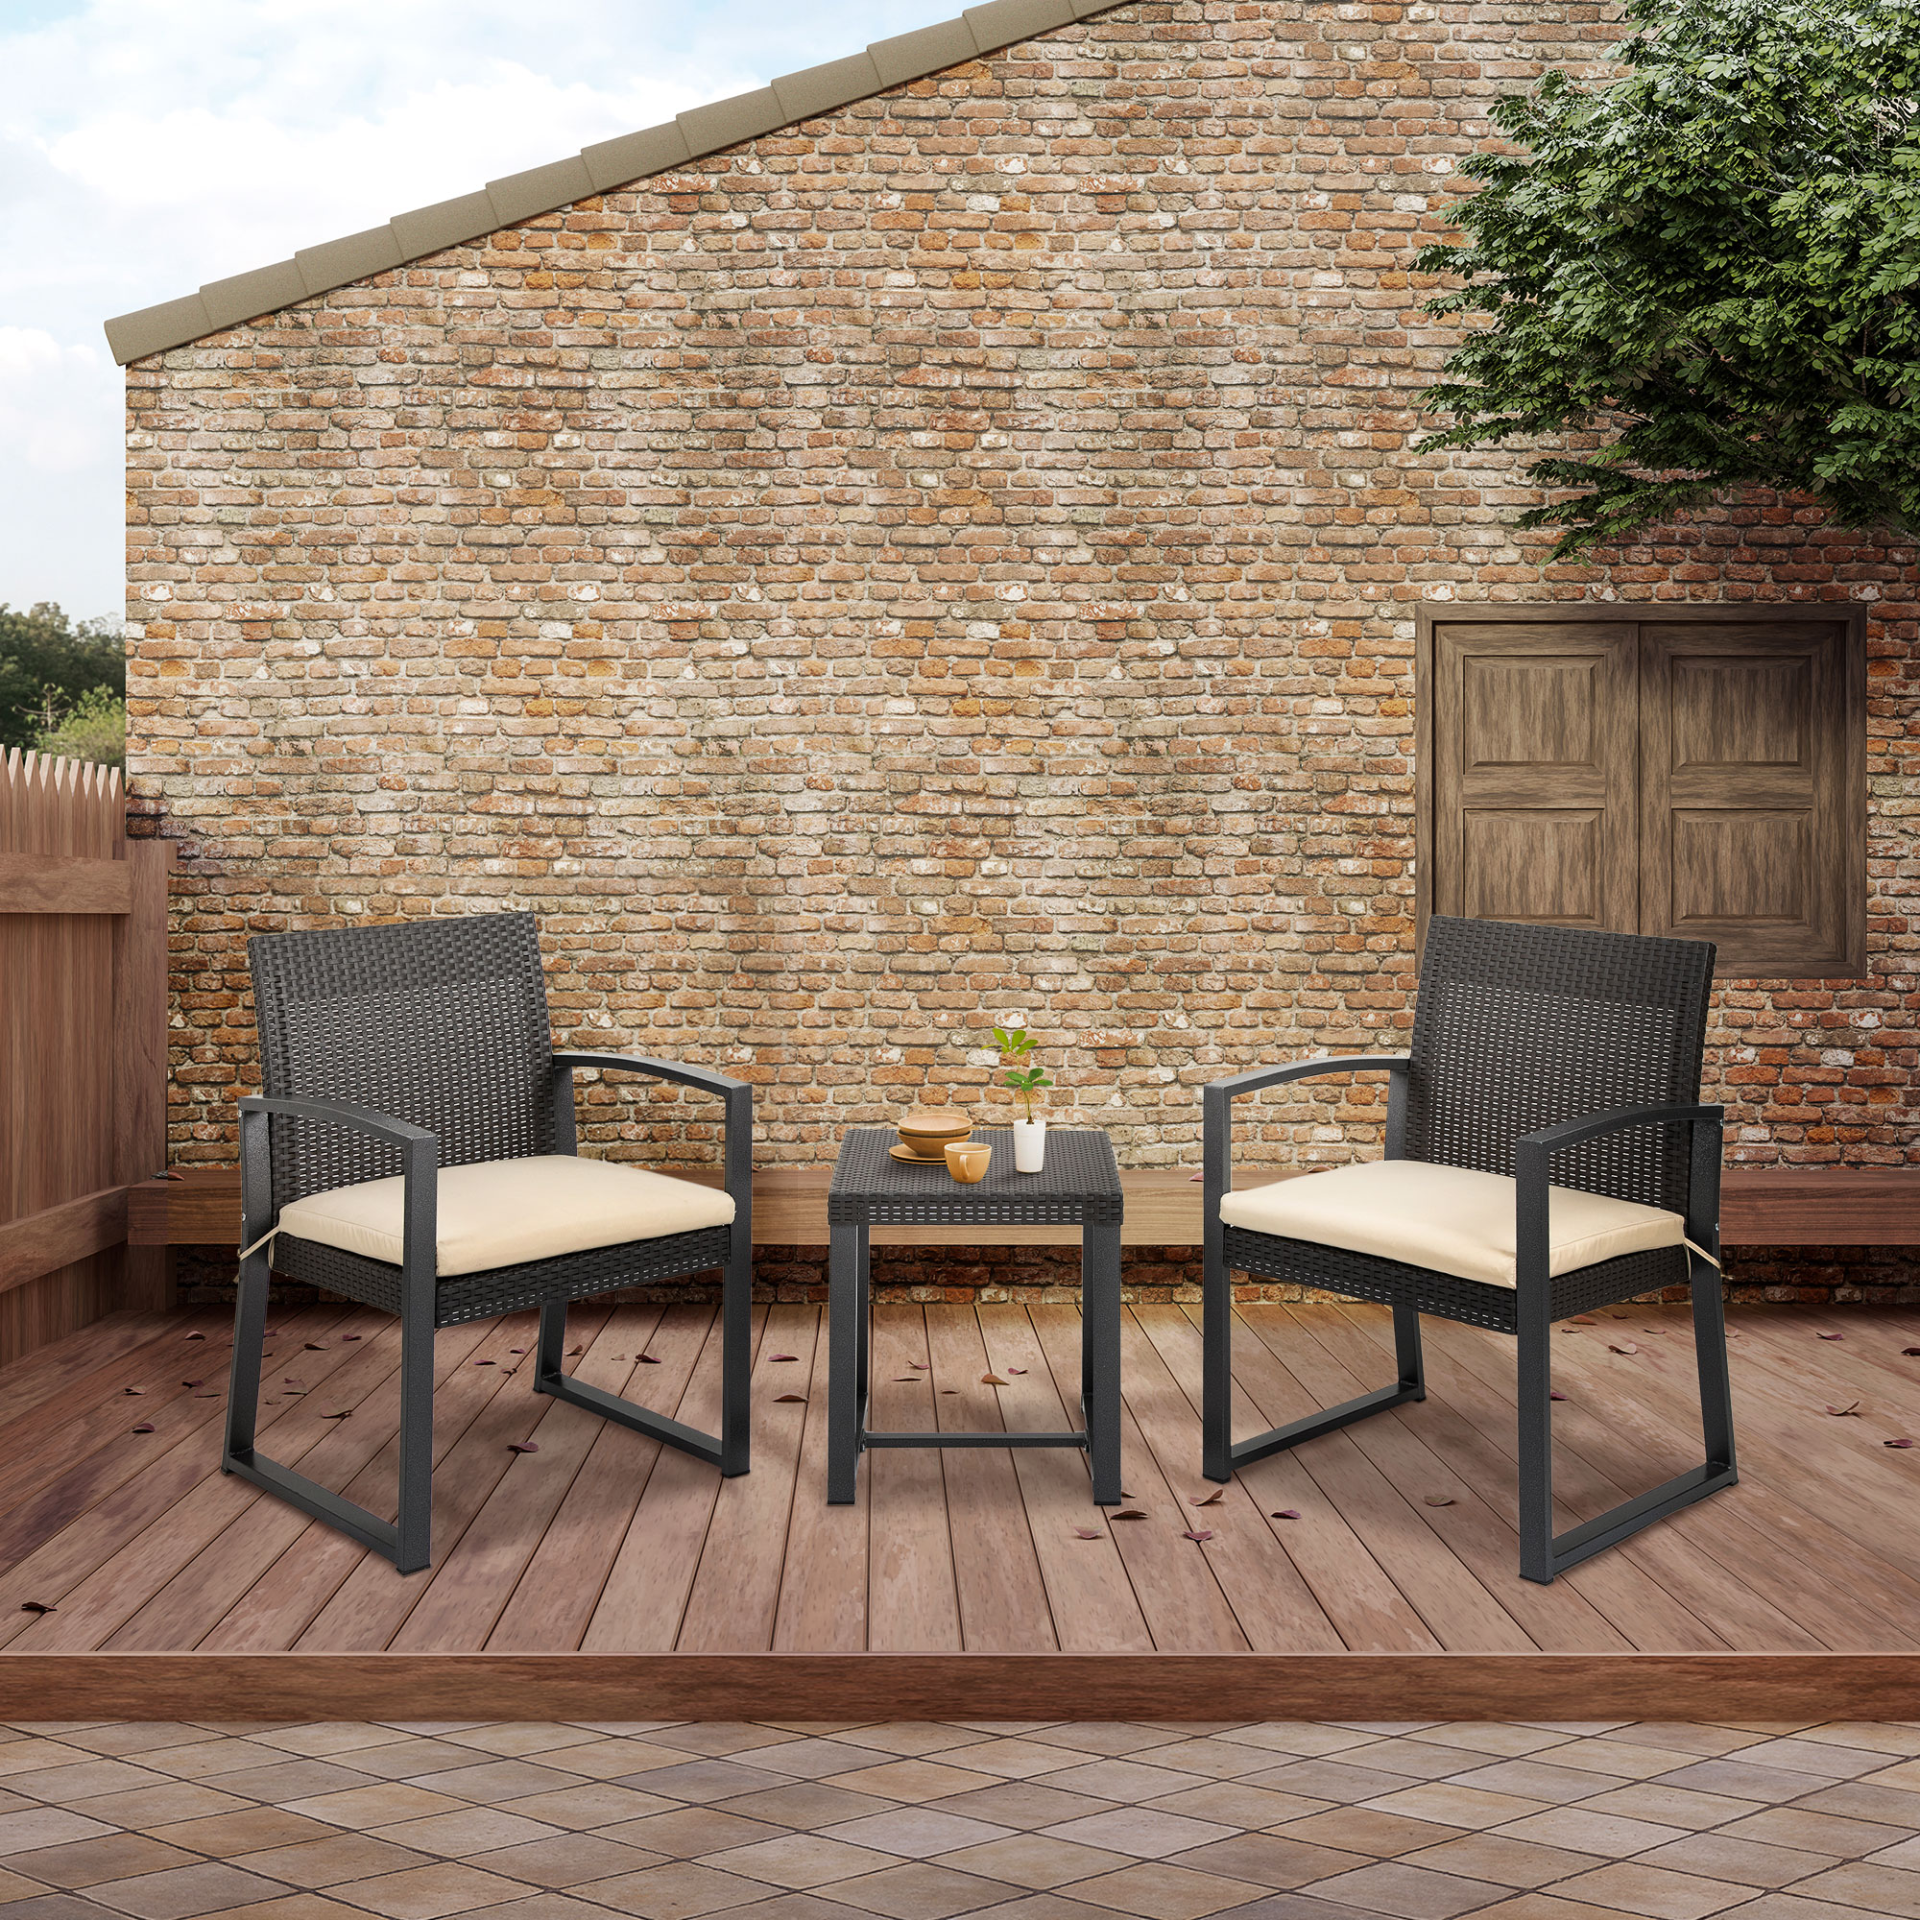 Outsunny Outdoor Garden PP Rattan Style Bistro Set, 3 PCS Patio Side Table Set w/ 2 Cushioned Single Chairs Conservatory Furniture, Brown